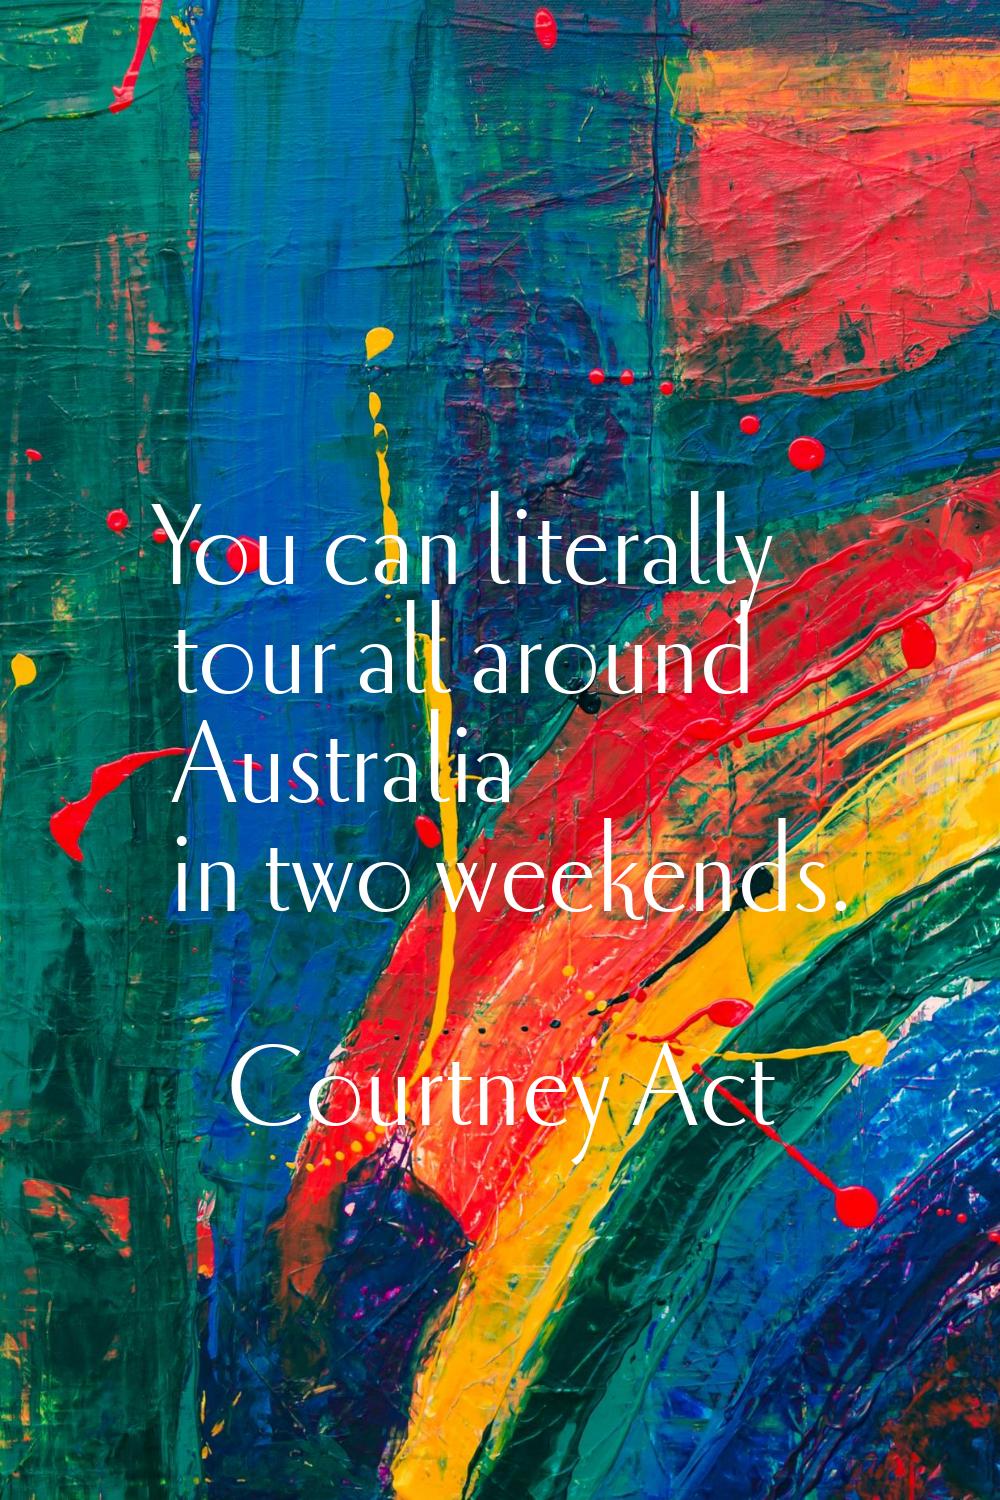 You can literally tour all around Australia in two weekends.